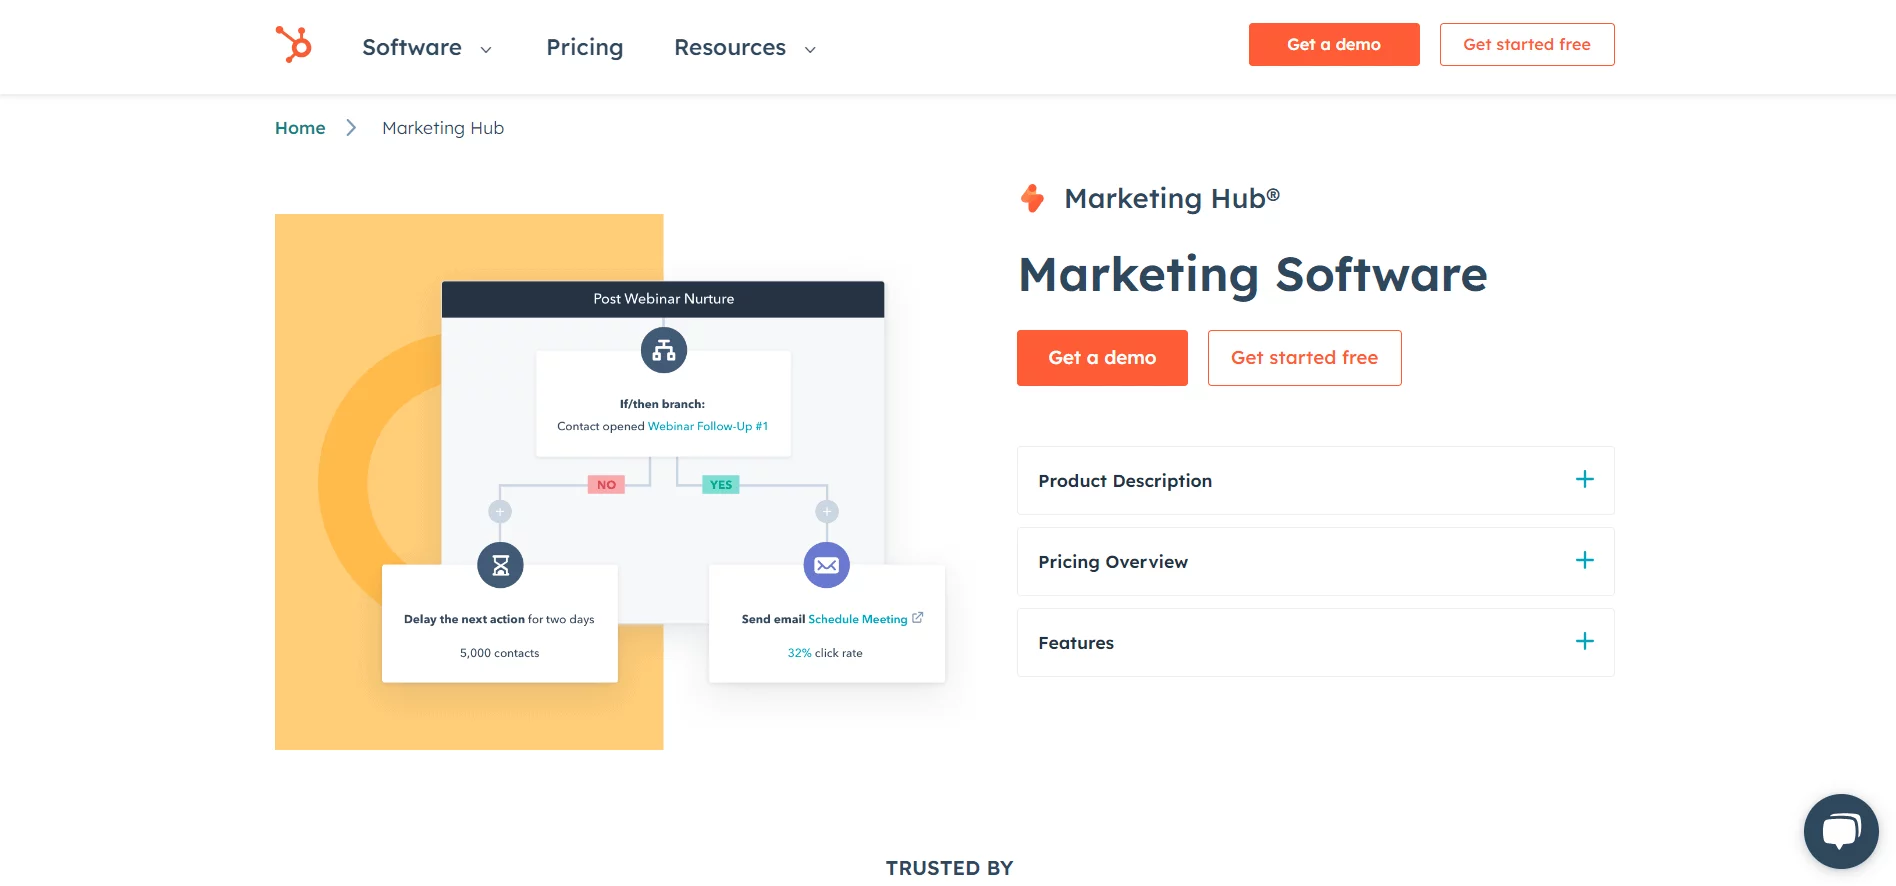 HubSpot Marketing Hub homepage showing a simple automation diagram for Post webinar nurture.